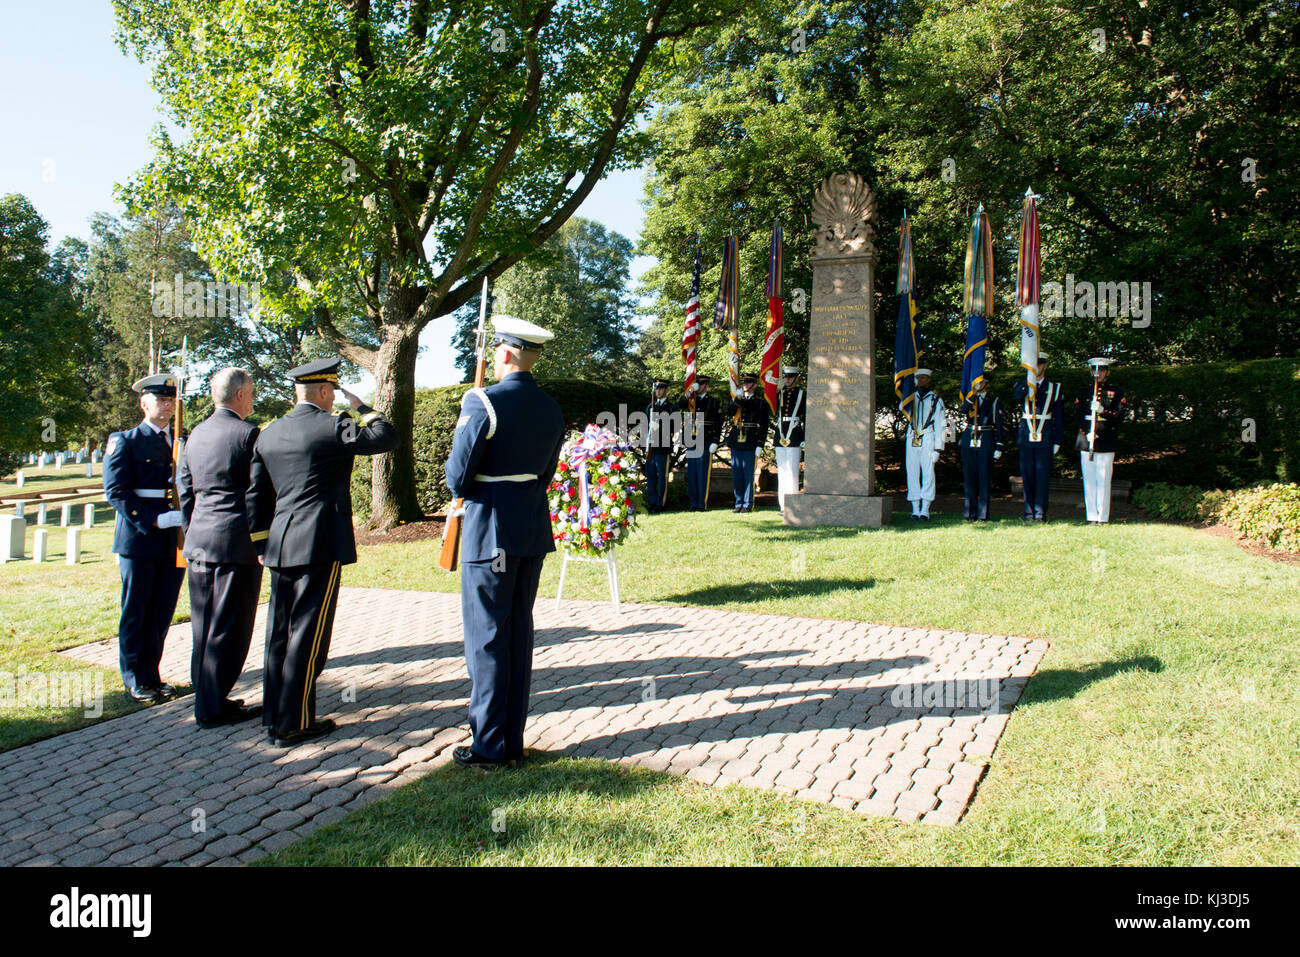 The U.S. Army Military District of Washington conducts a Presidential Armed Forces Full Honor Wreath-Laying Ceremony at the grave of President William H. Taft in Arlington National Cemetery to celebrate his 158th birt 0101 Stock Photo